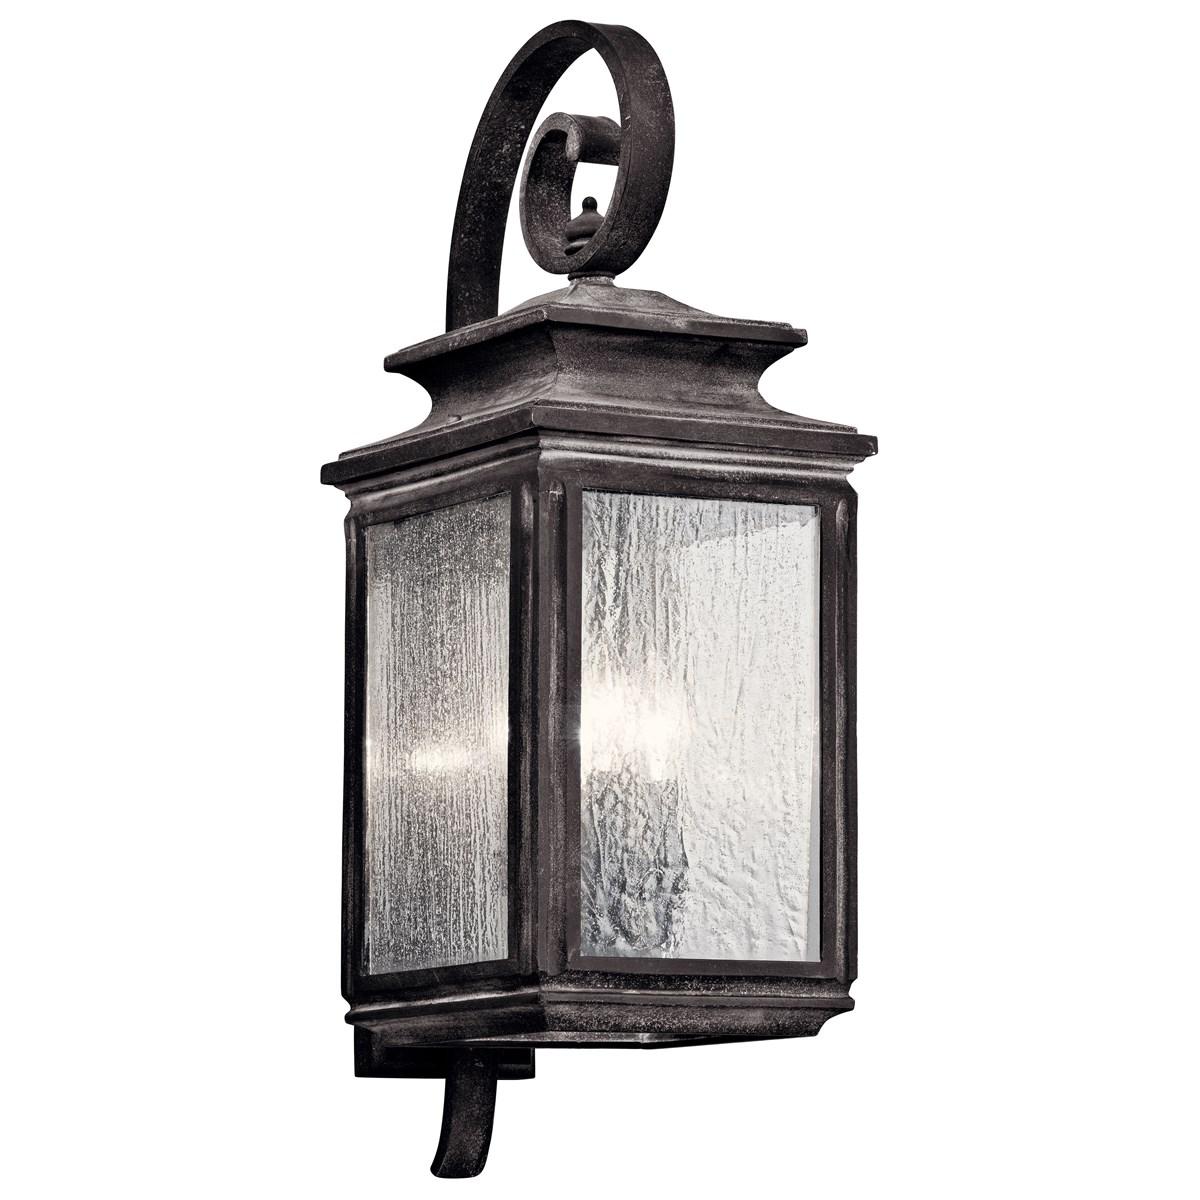 Wiscombe Park 26 in. Outdoor Wall Light